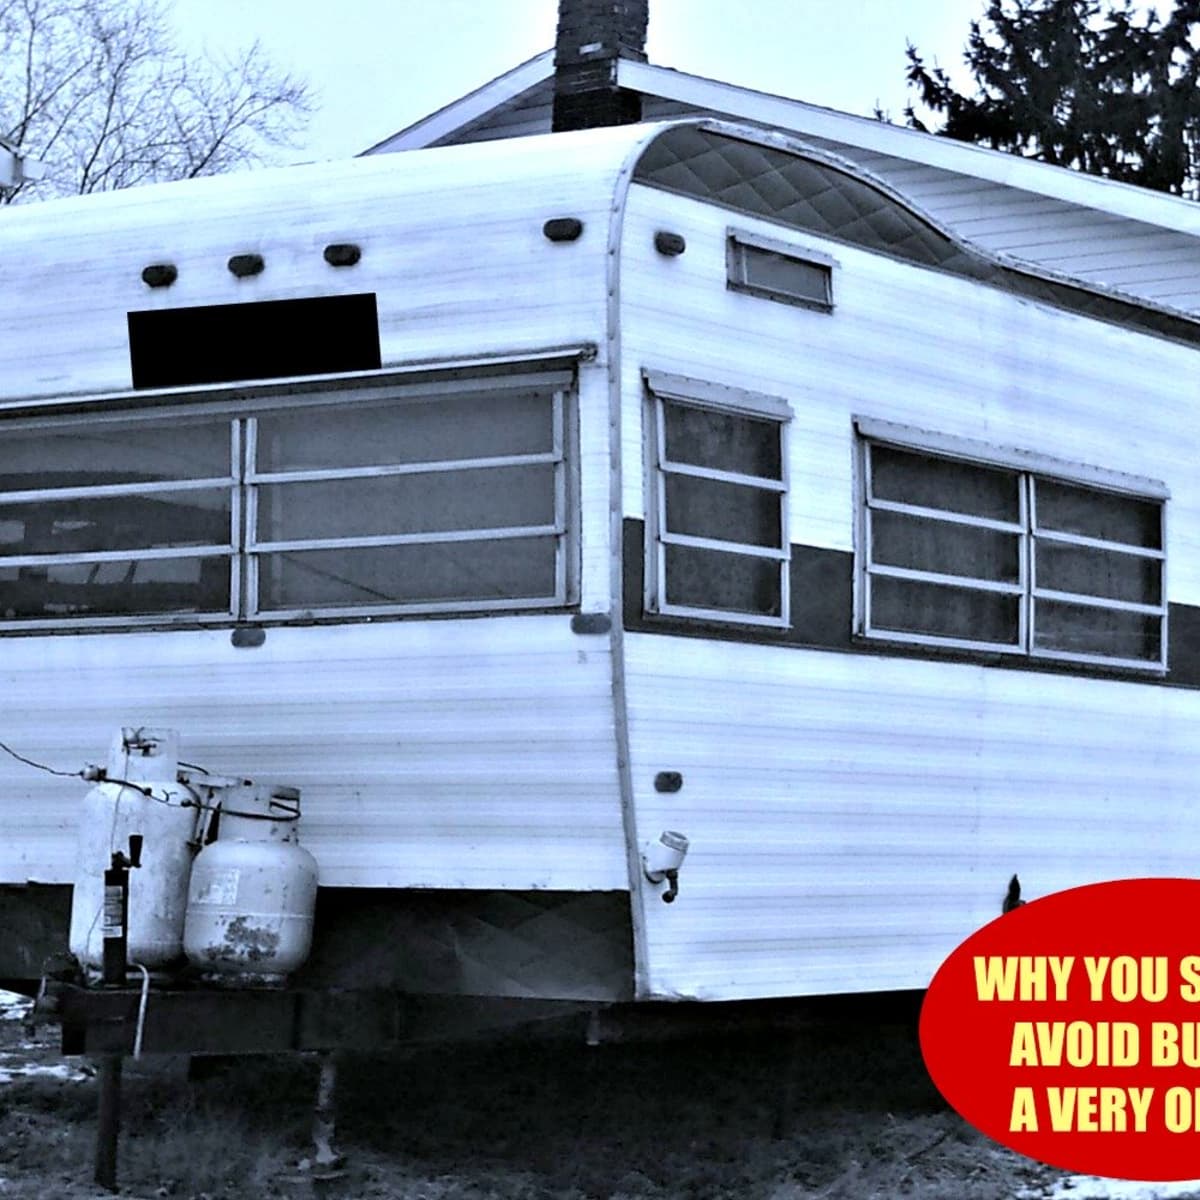 cocaïne BES Permanent Why You Should Avoid Buying a Really Old RV - AxleAddict